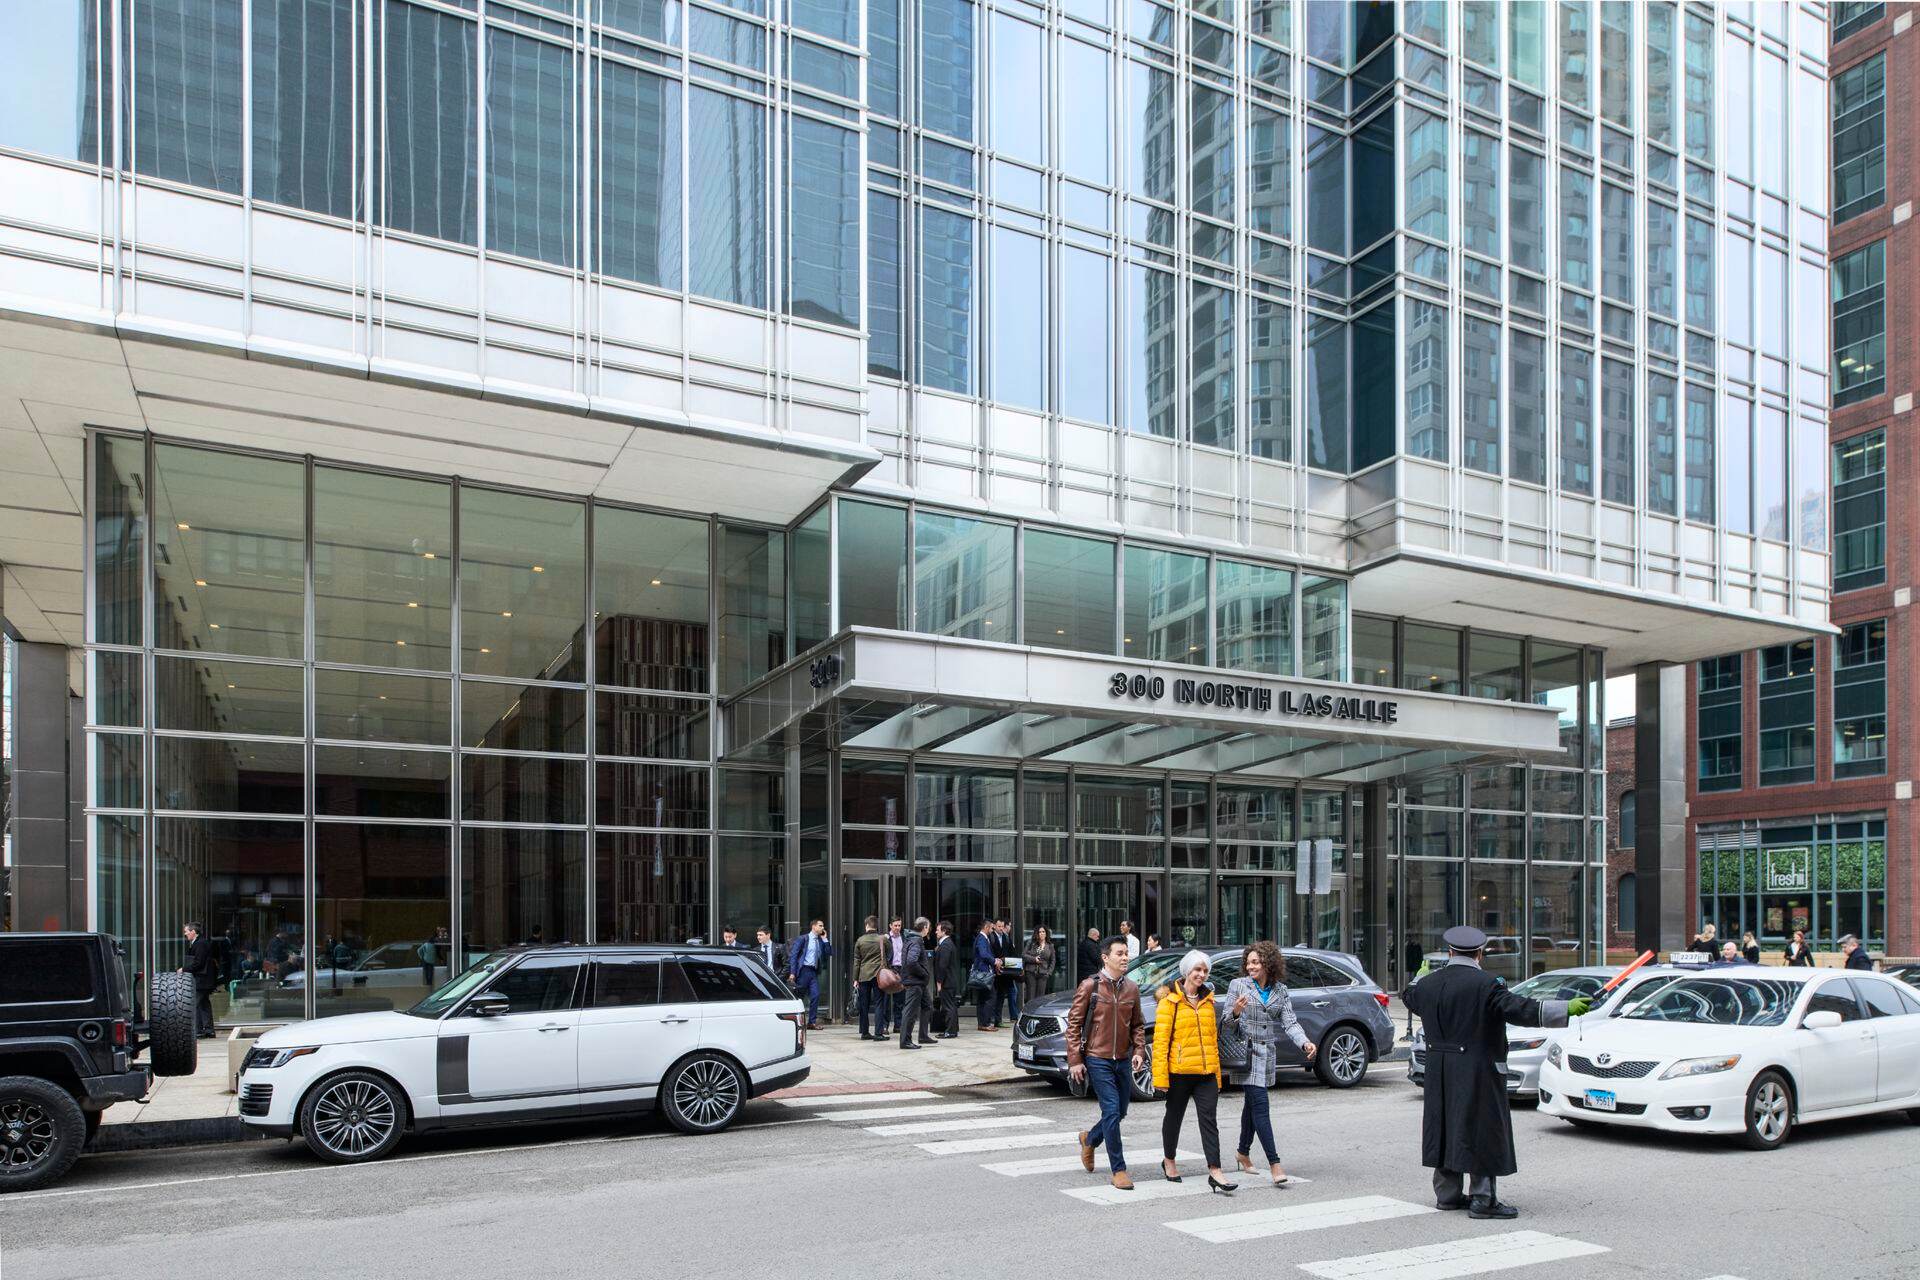 Lfiestyle photography of the building exterior and crosswalk at 300 North LaSalle in Chicago, IL